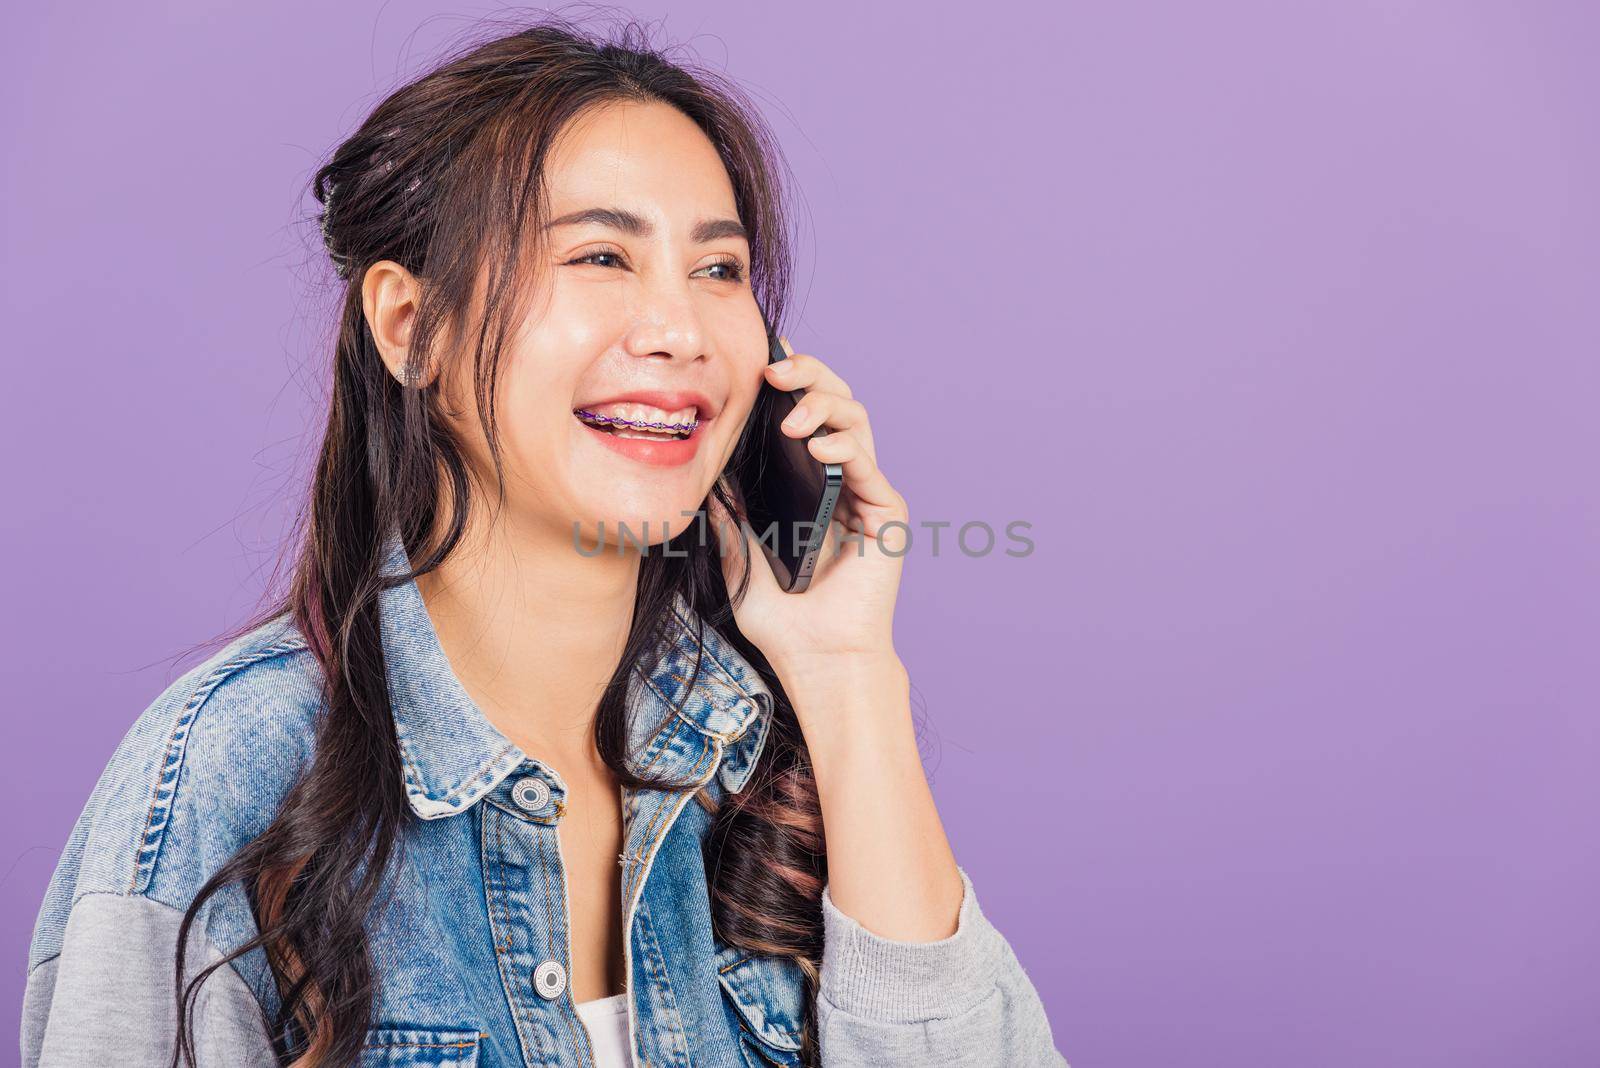 woman confident smiling on phone call with smartphone by Sorapop